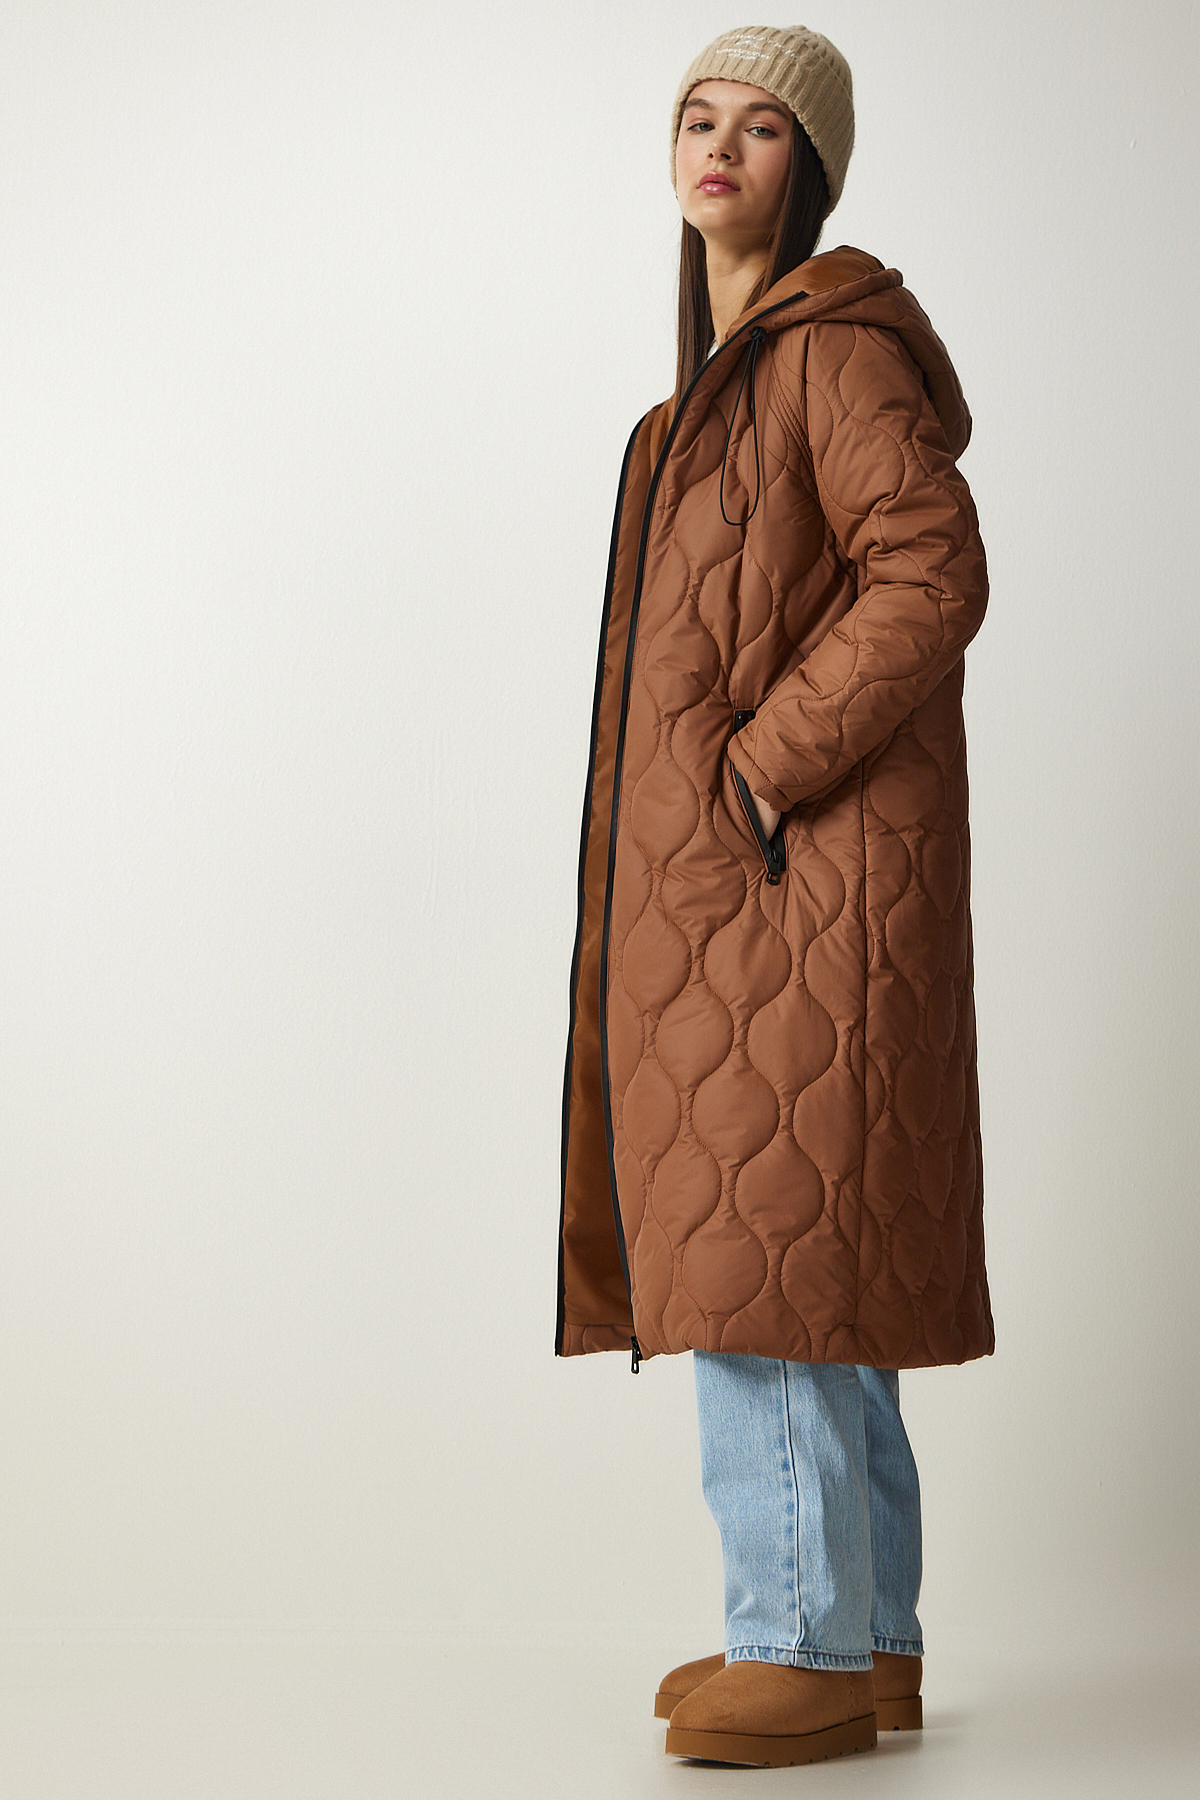 Levně Happiness İstanbul Women's Brown Hooded Quilted Coat with Pockets